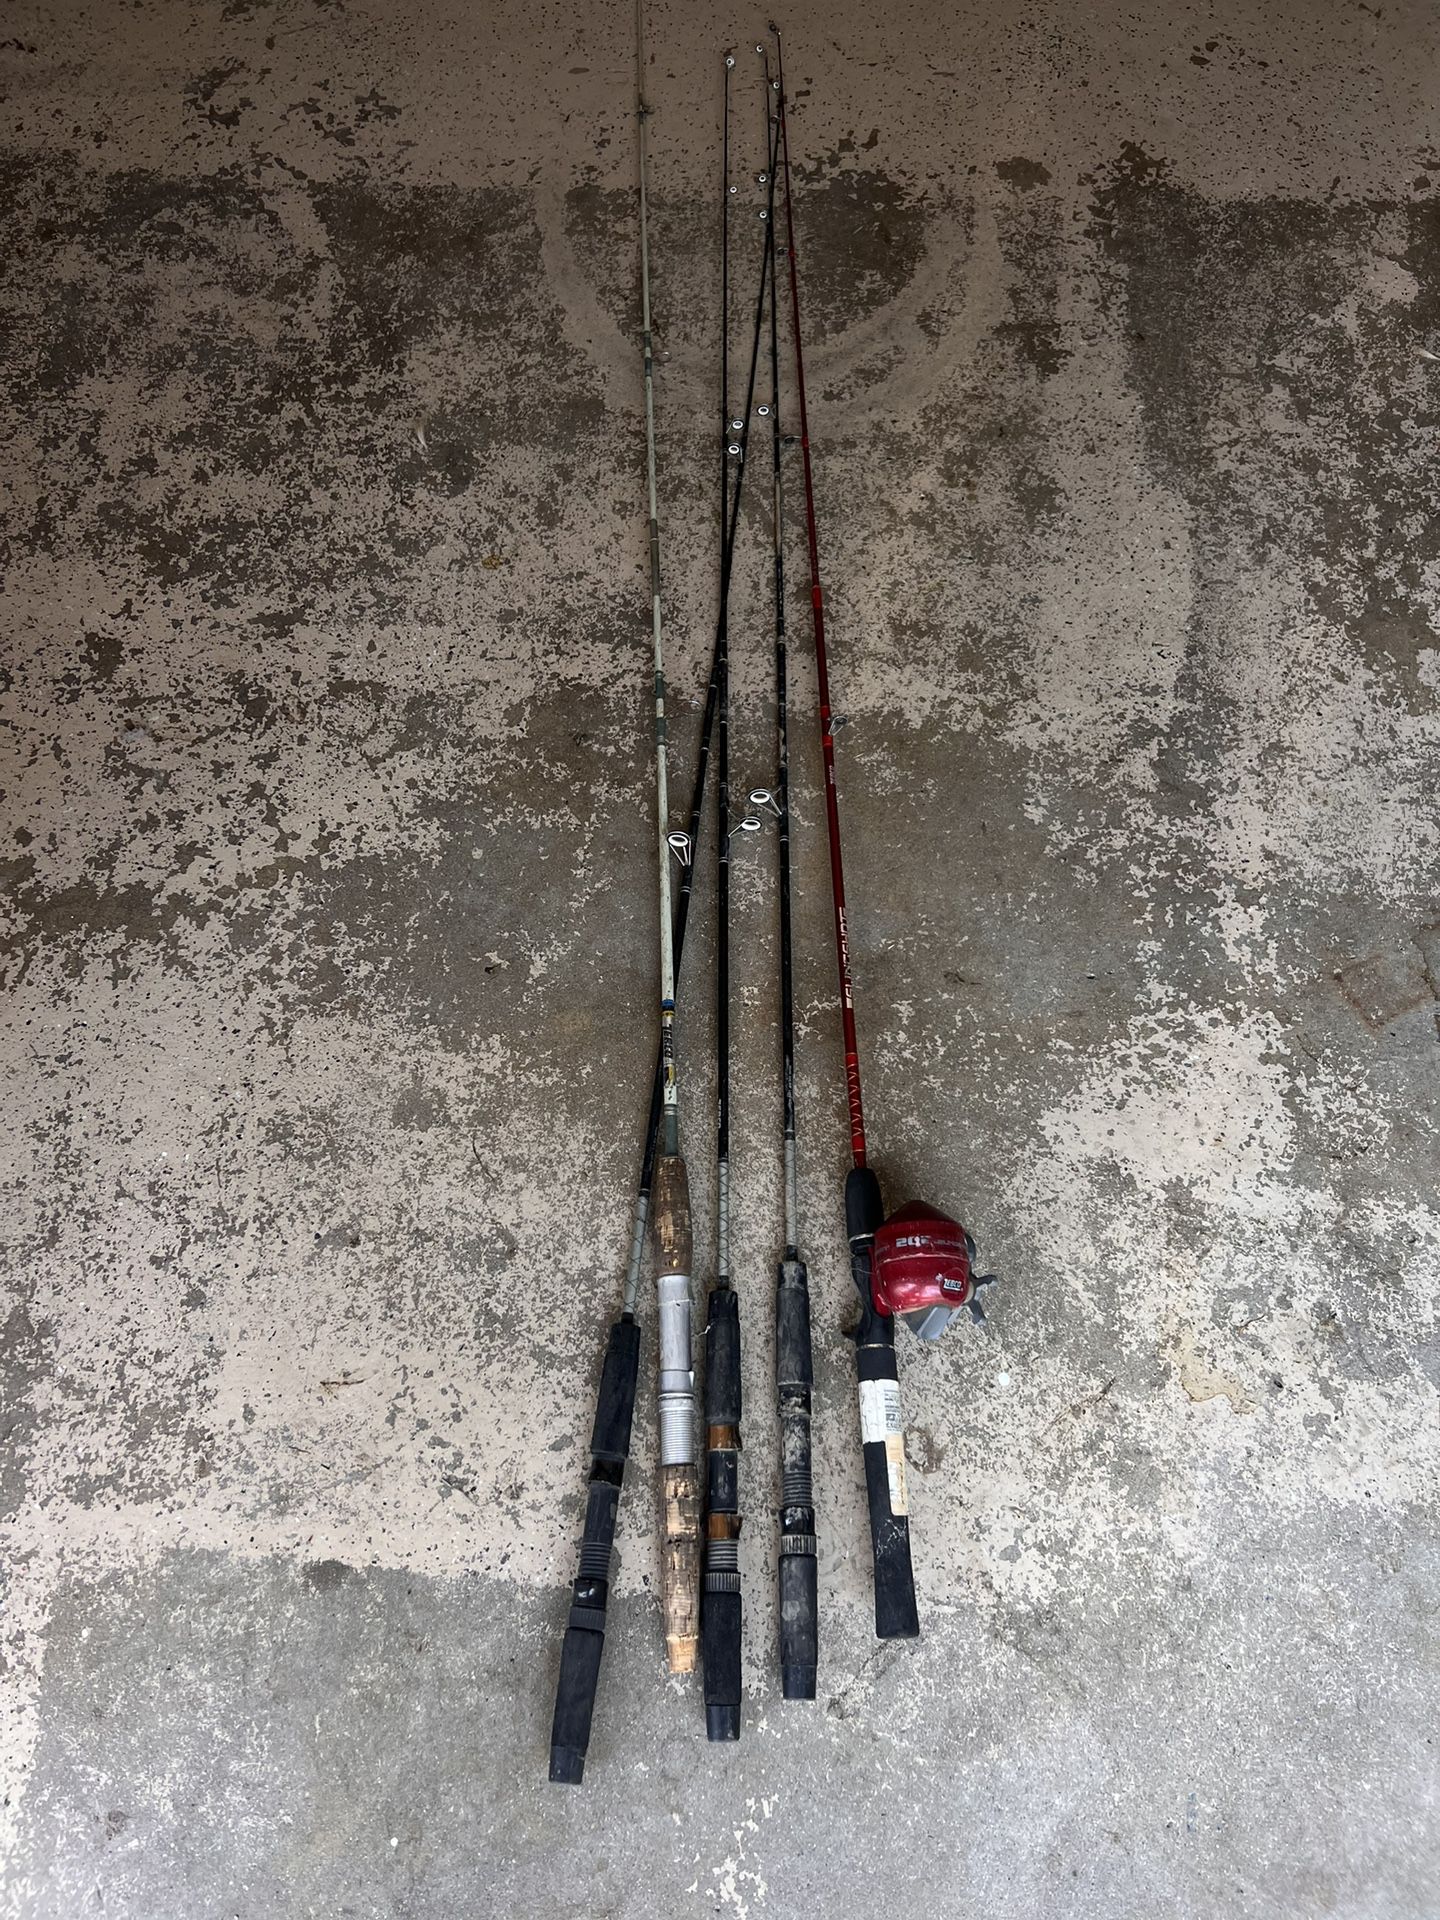 Fishing Poles ONLY! fish Poles BUNDLE Fishing Equipment Outdoors Fishing Poles MAKE AN OFFER!